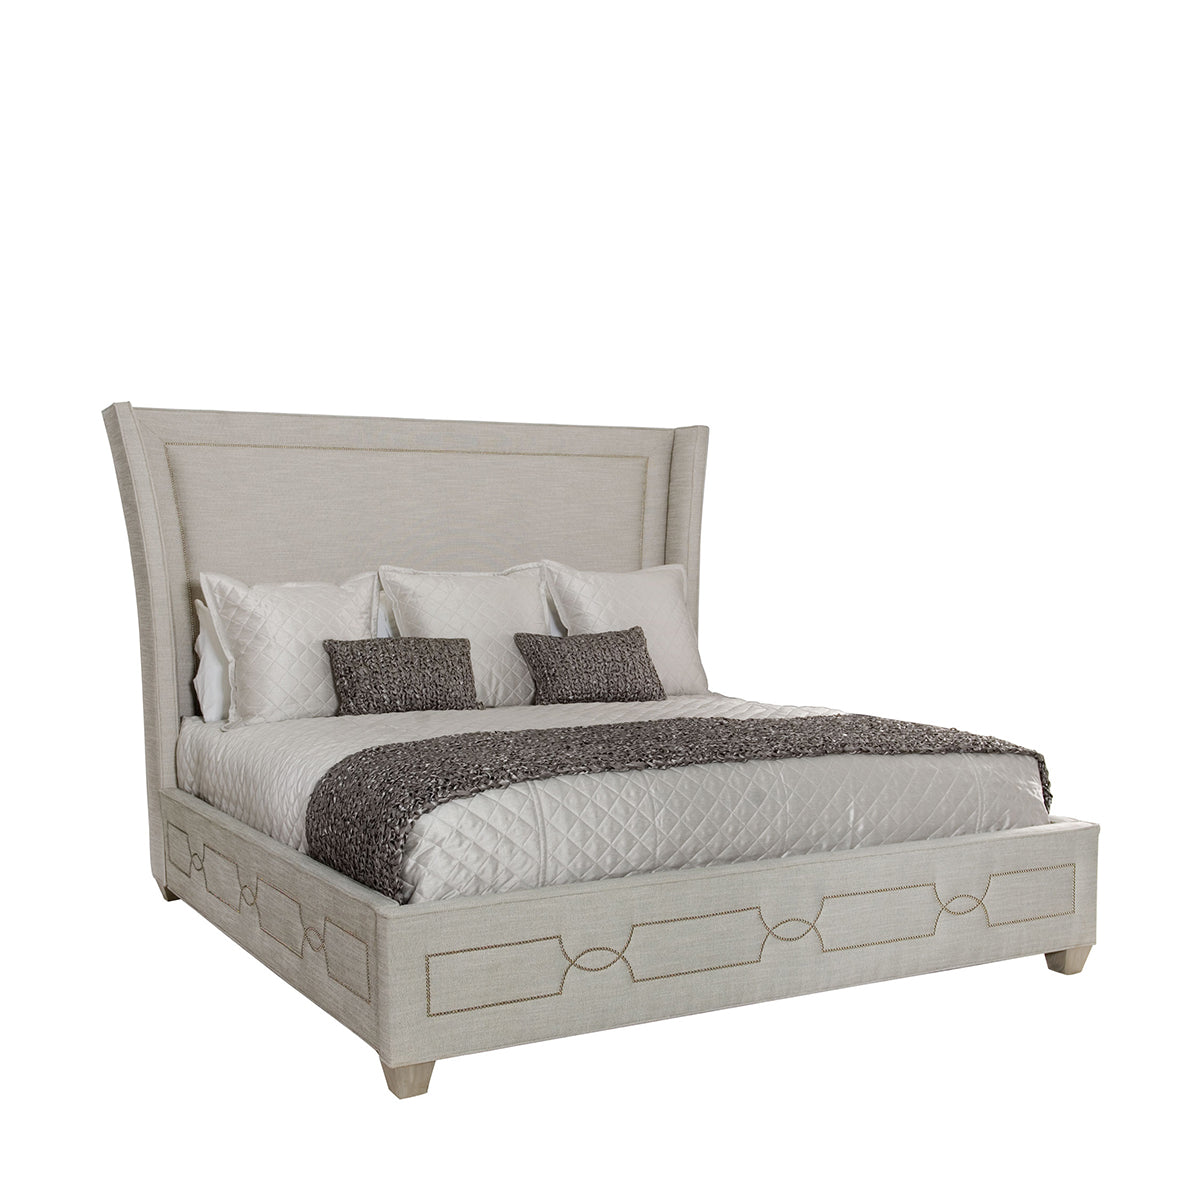 CRITERIA UPHOLSTERED BED